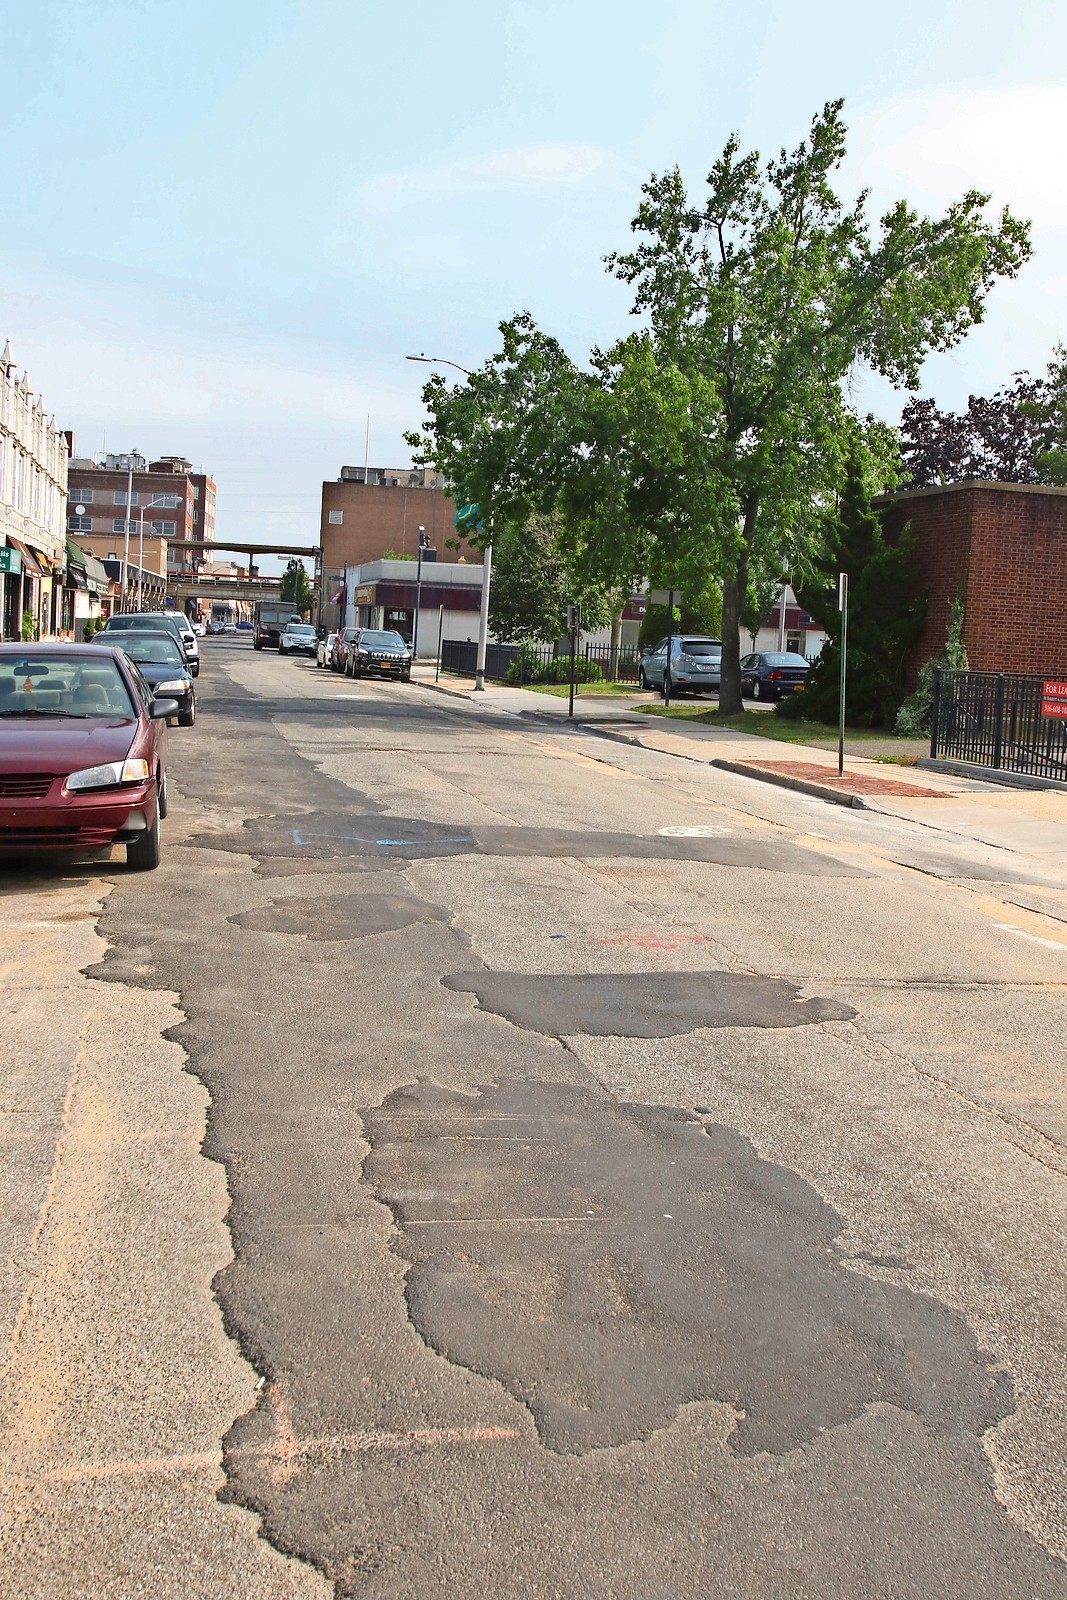 The village will renovate the streetscape, lighting, sidewalks, curbs, aprons and the road surface of North Park Avenue. Officials hope to complete the work by the end of October.